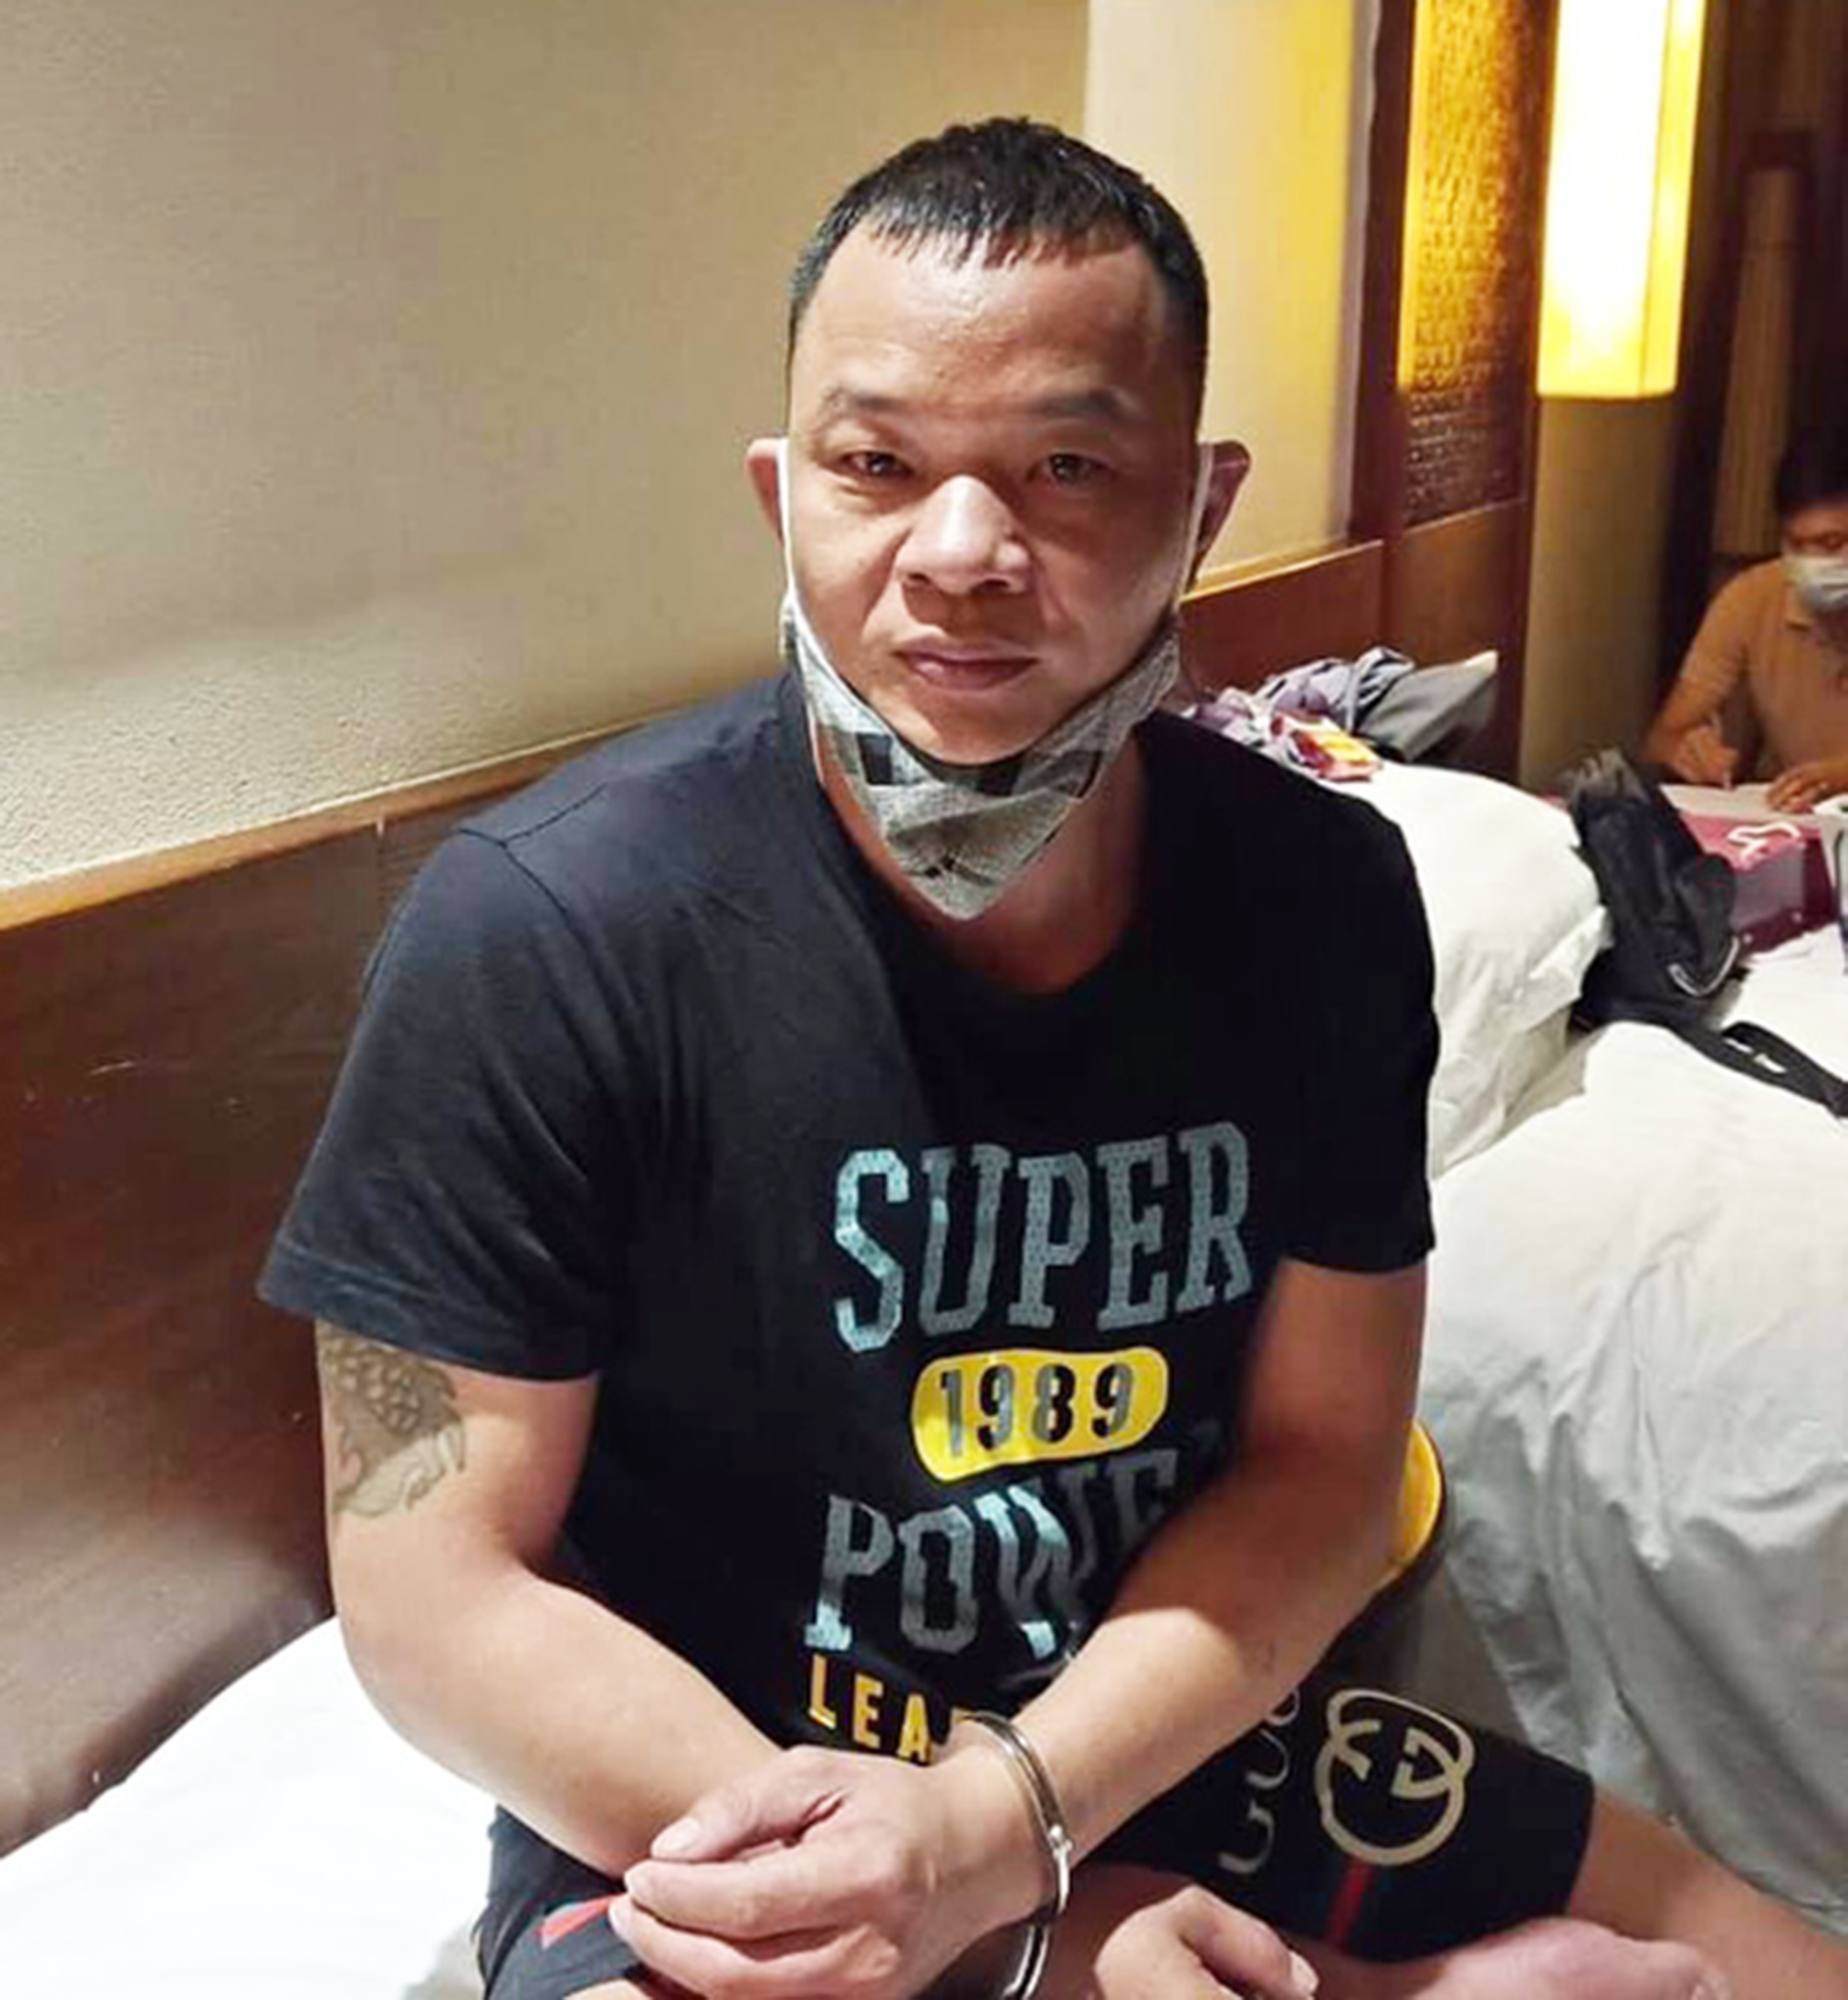 China’s Gao Liang Gu, 40, is arrested in Vietnam for smuggling people into the Southeast Asian nation in a photo provided by police officers in Quang Nam Province, Vietnam.